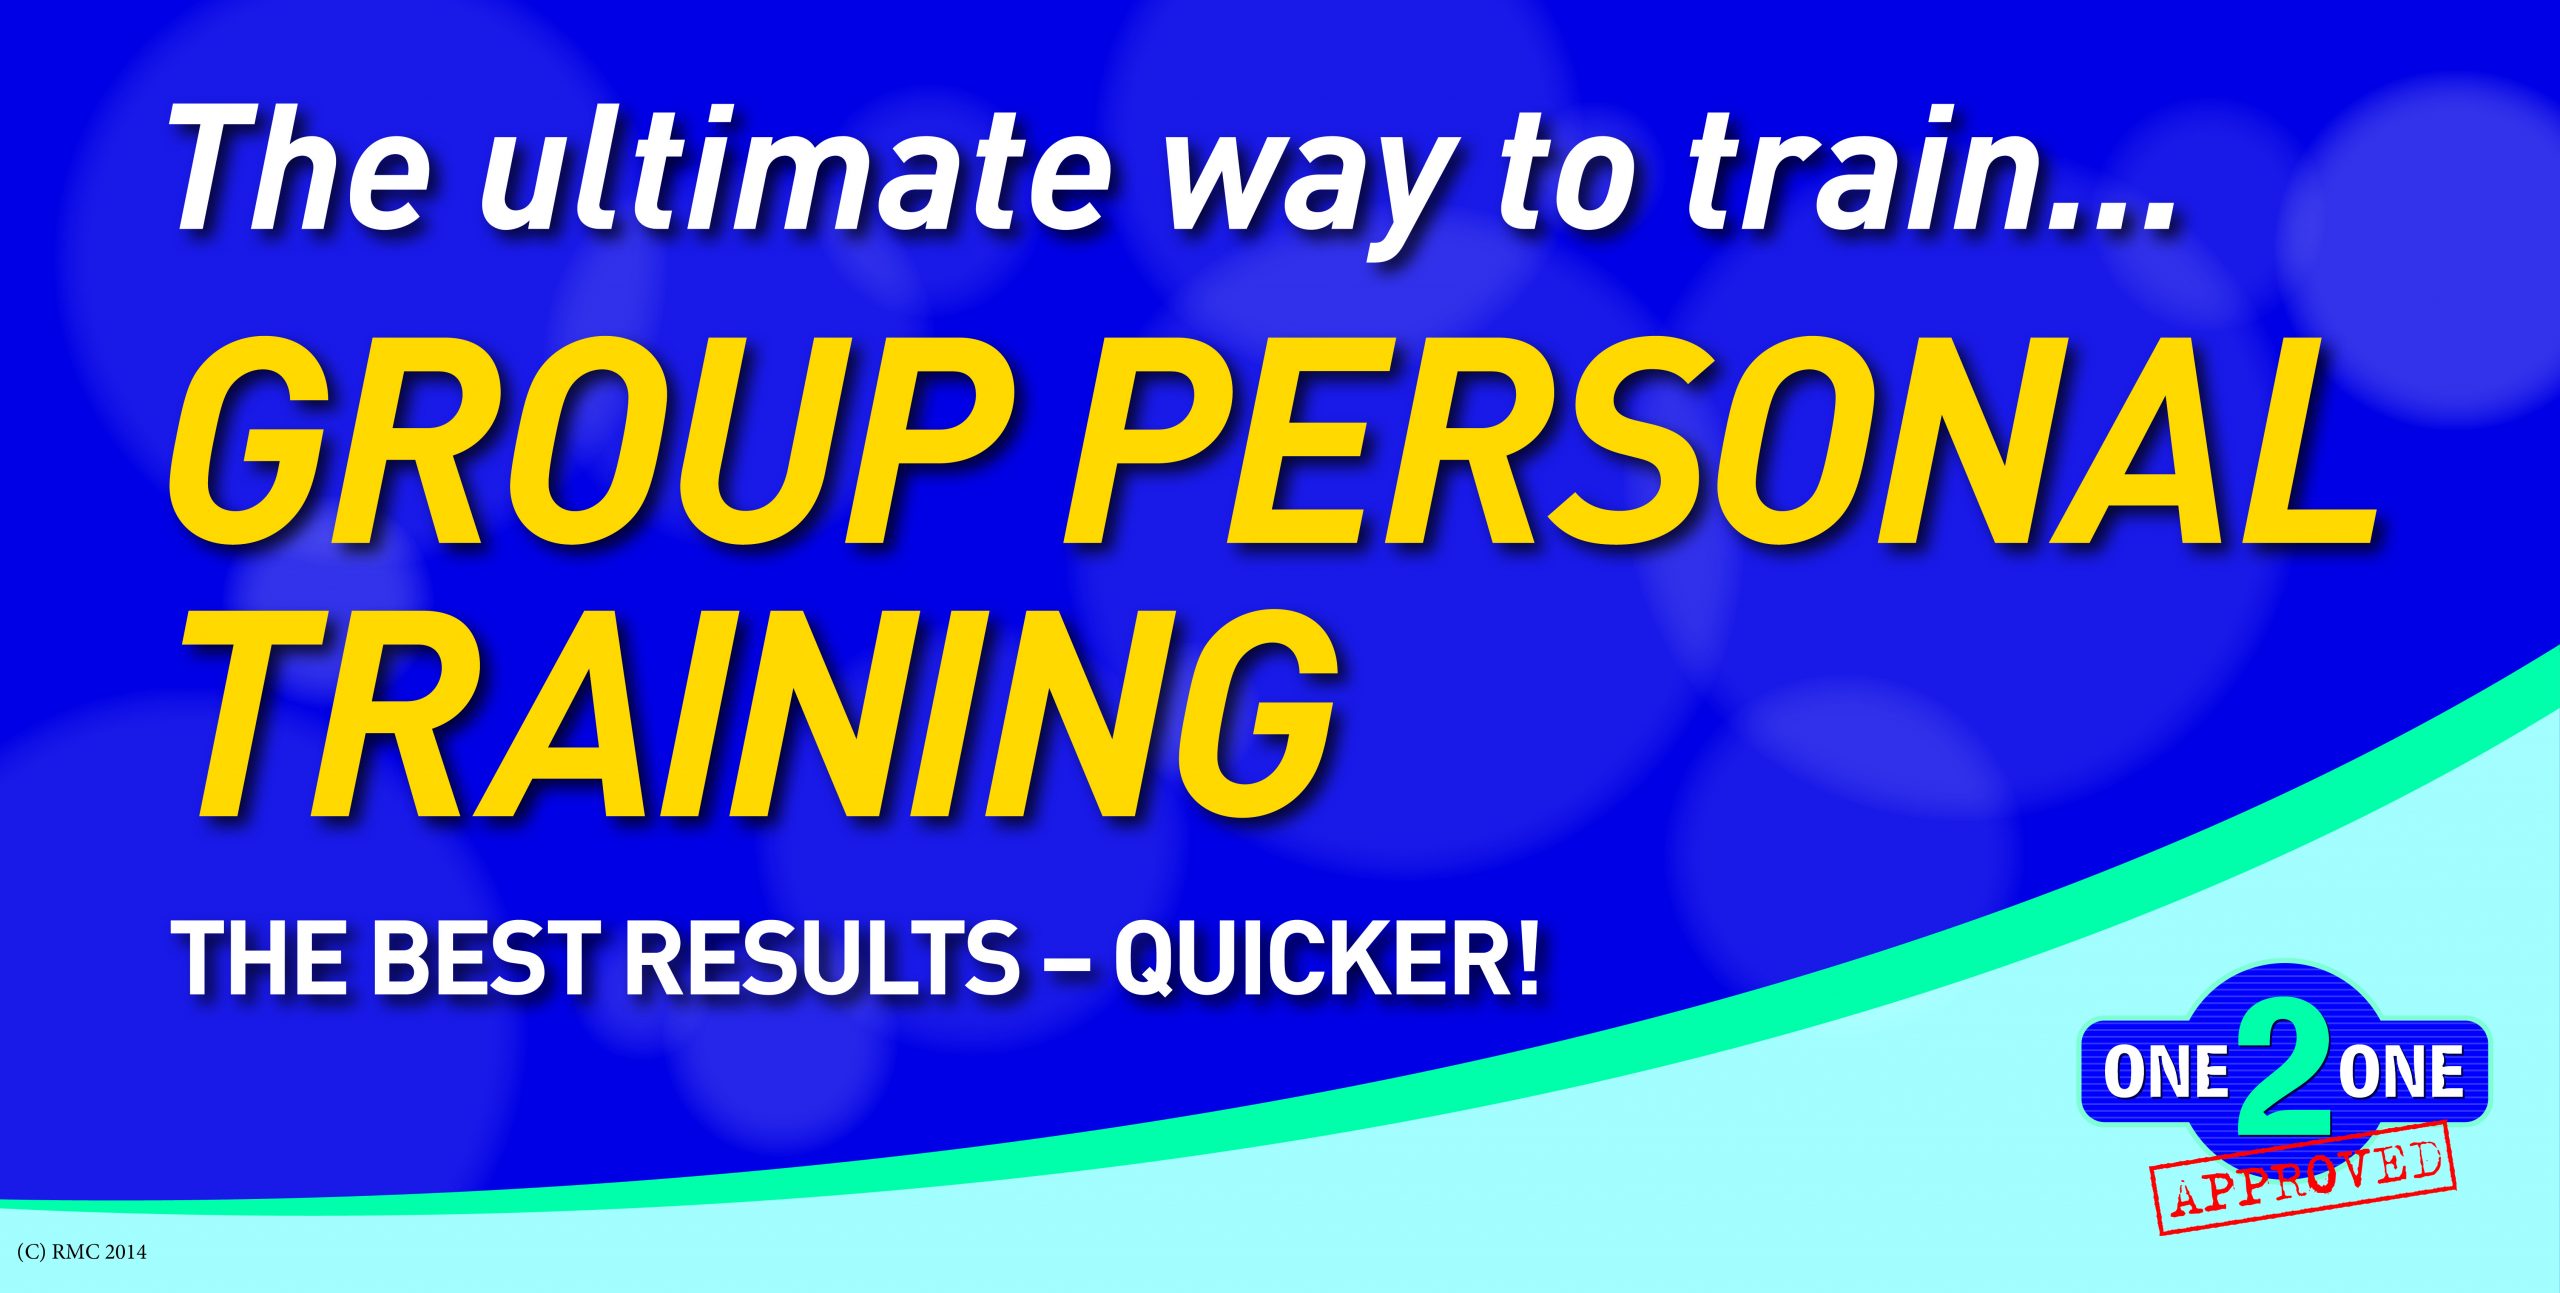 One2One Personal training